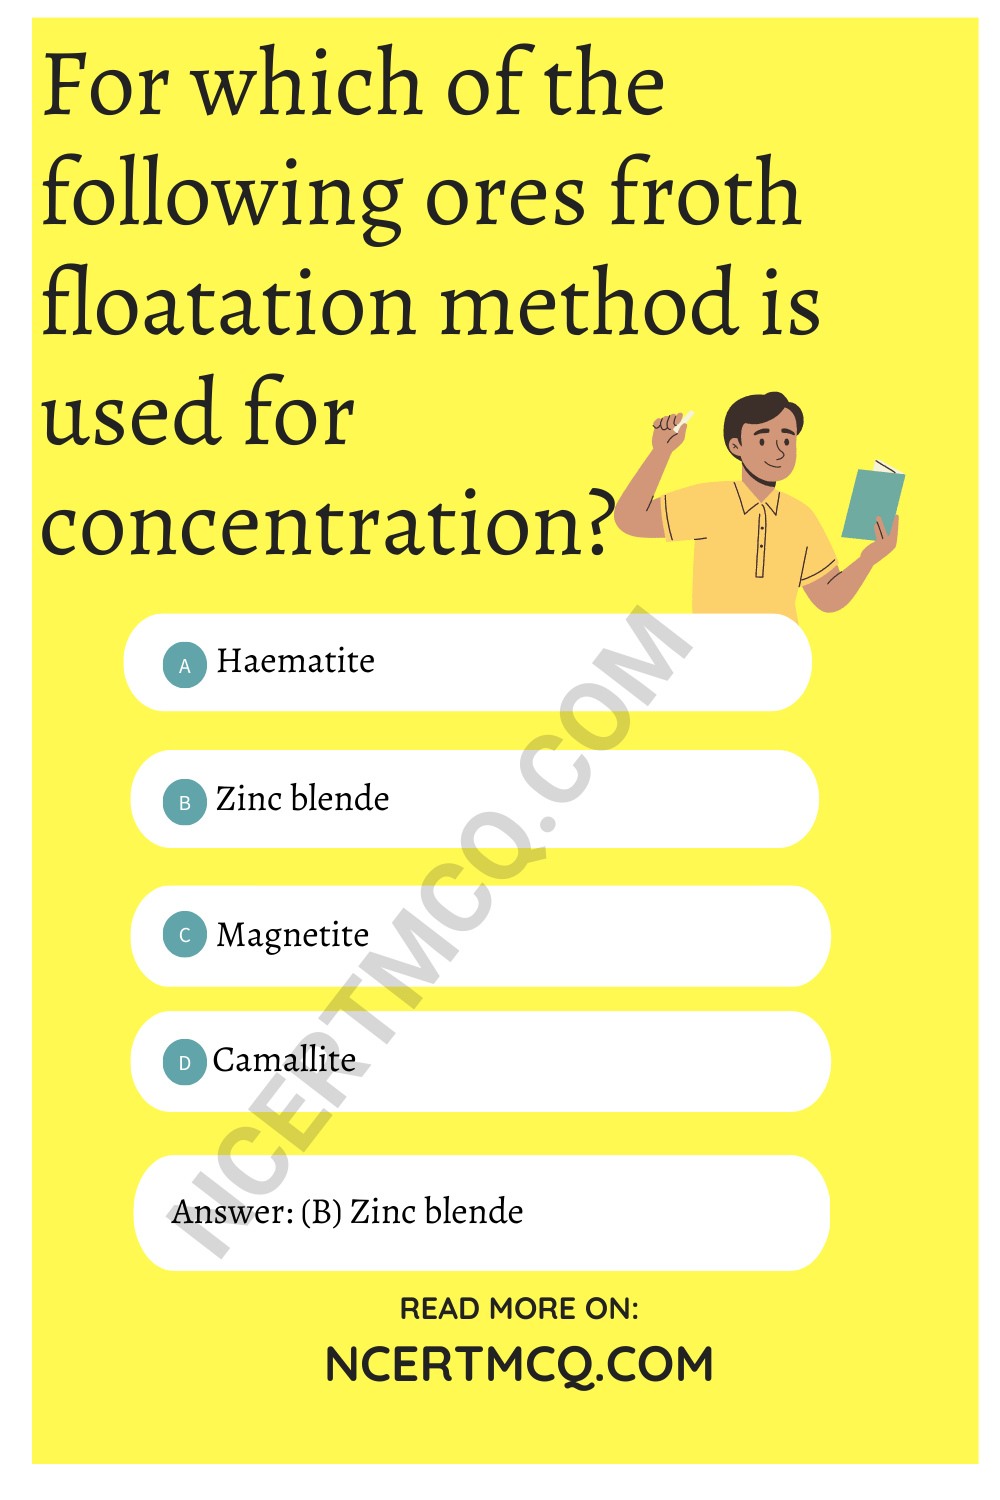 For which of the following ores froth floatation method is used for concentration?